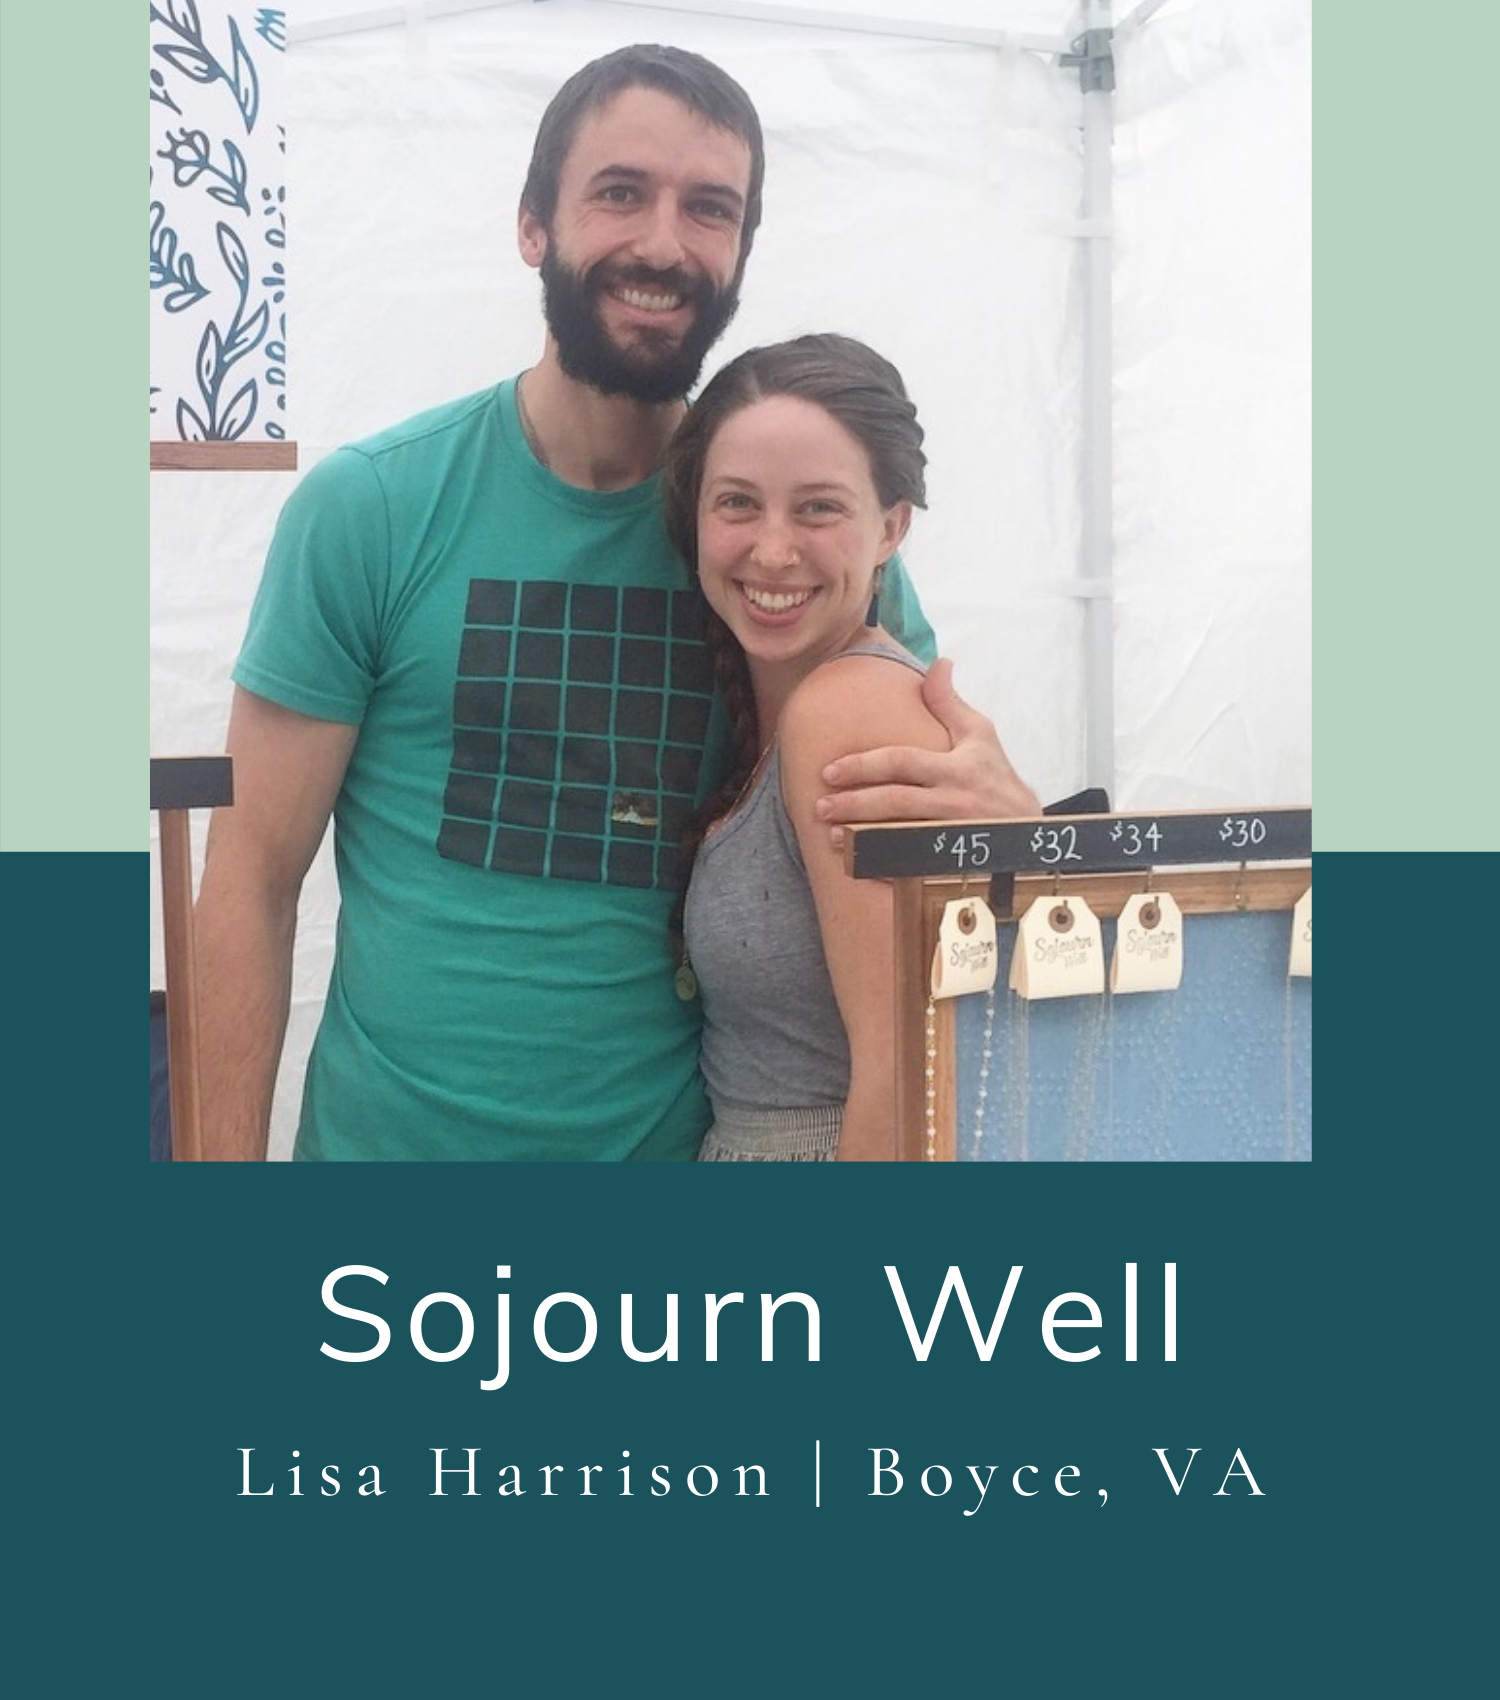 SOJOURN WELL